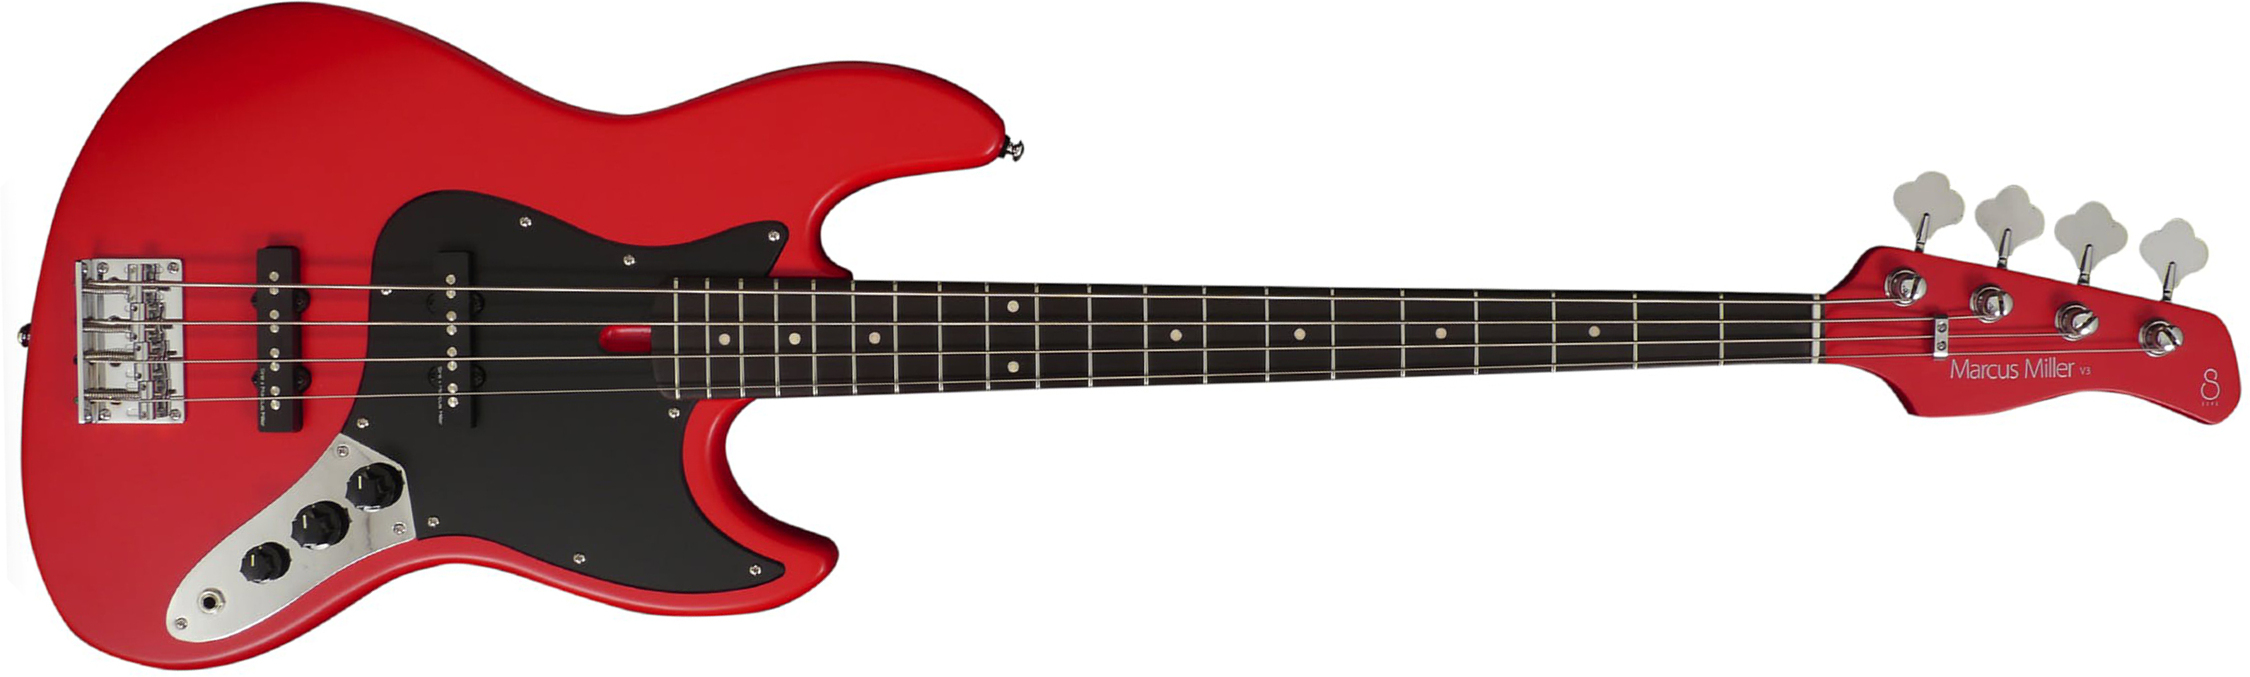 Marcus Miller V3p 4st Rw - Red Satin - Solidbody E-bass - Main picture